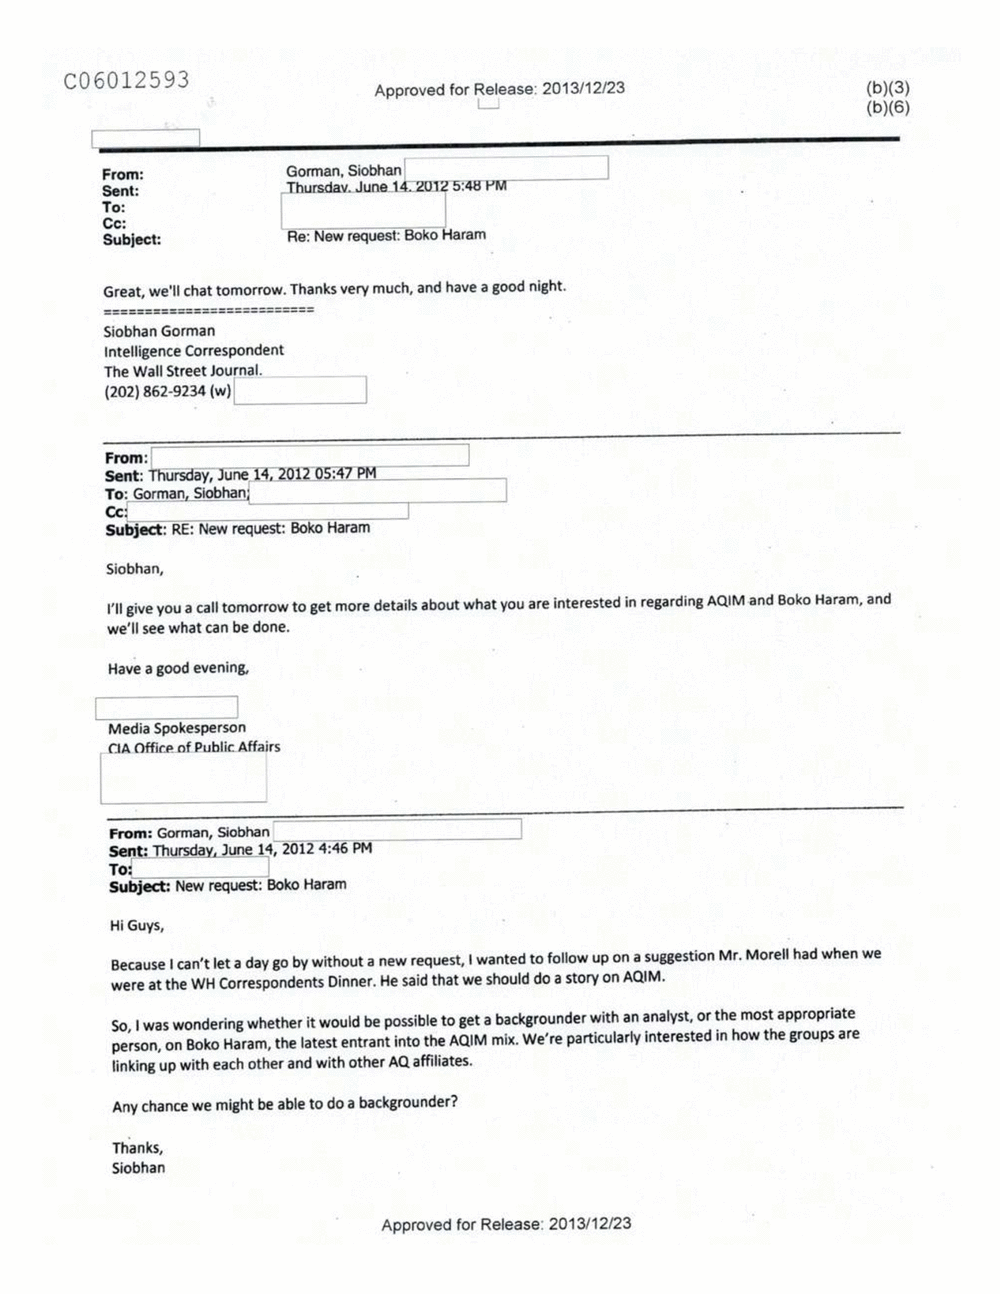 Page 148 from Email Correspondence Between Reporters and CIA Flacks